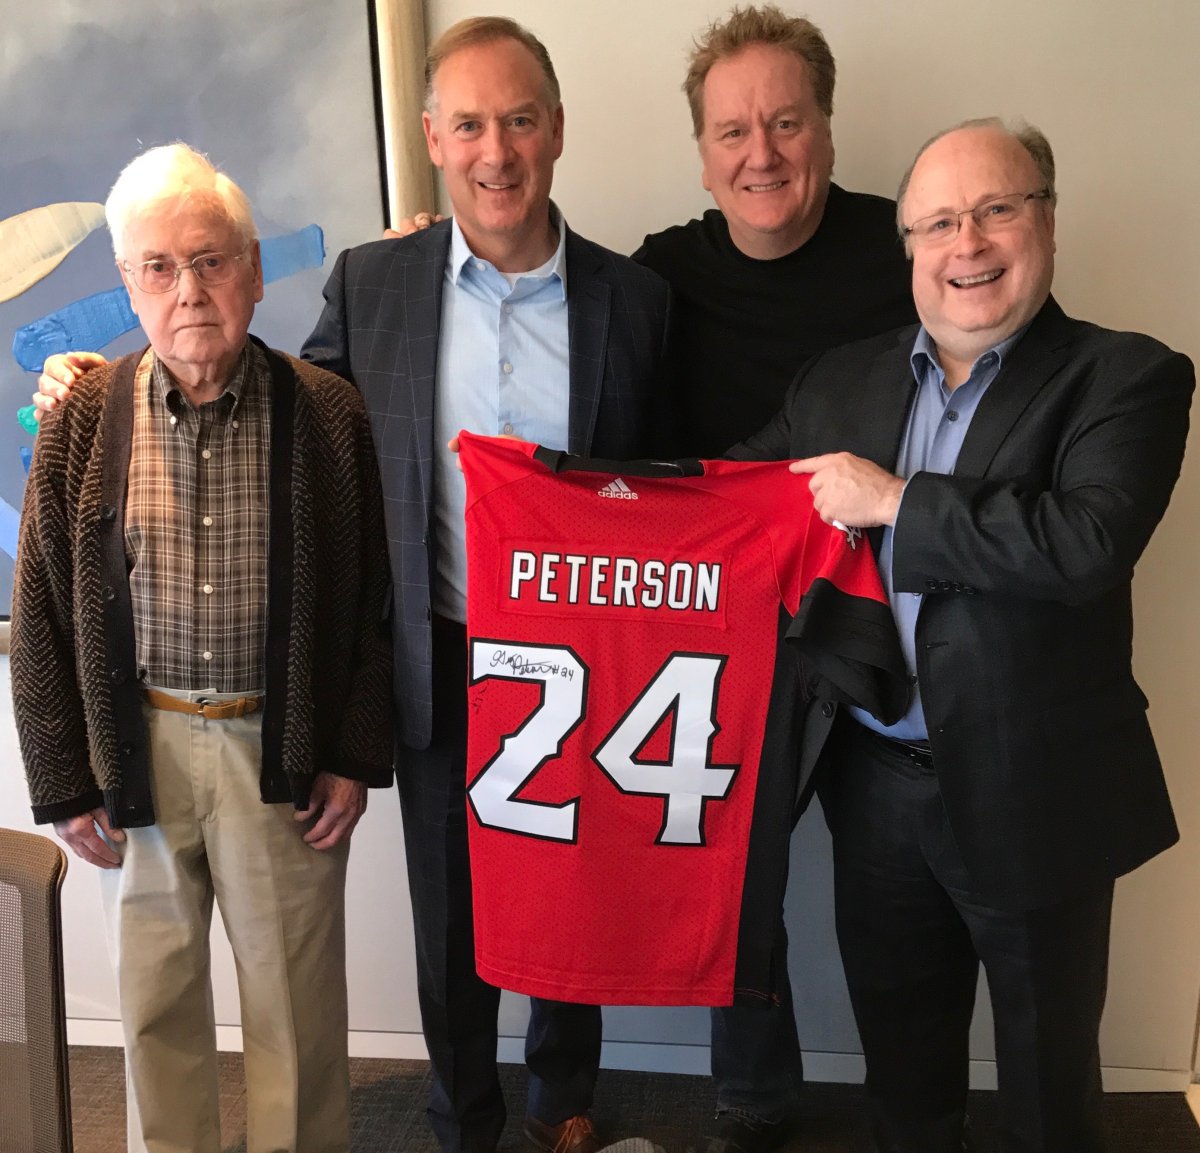 Dave Conn had the winning bid on former Calgary Stampeder Greg Peterson's #24 jersey.